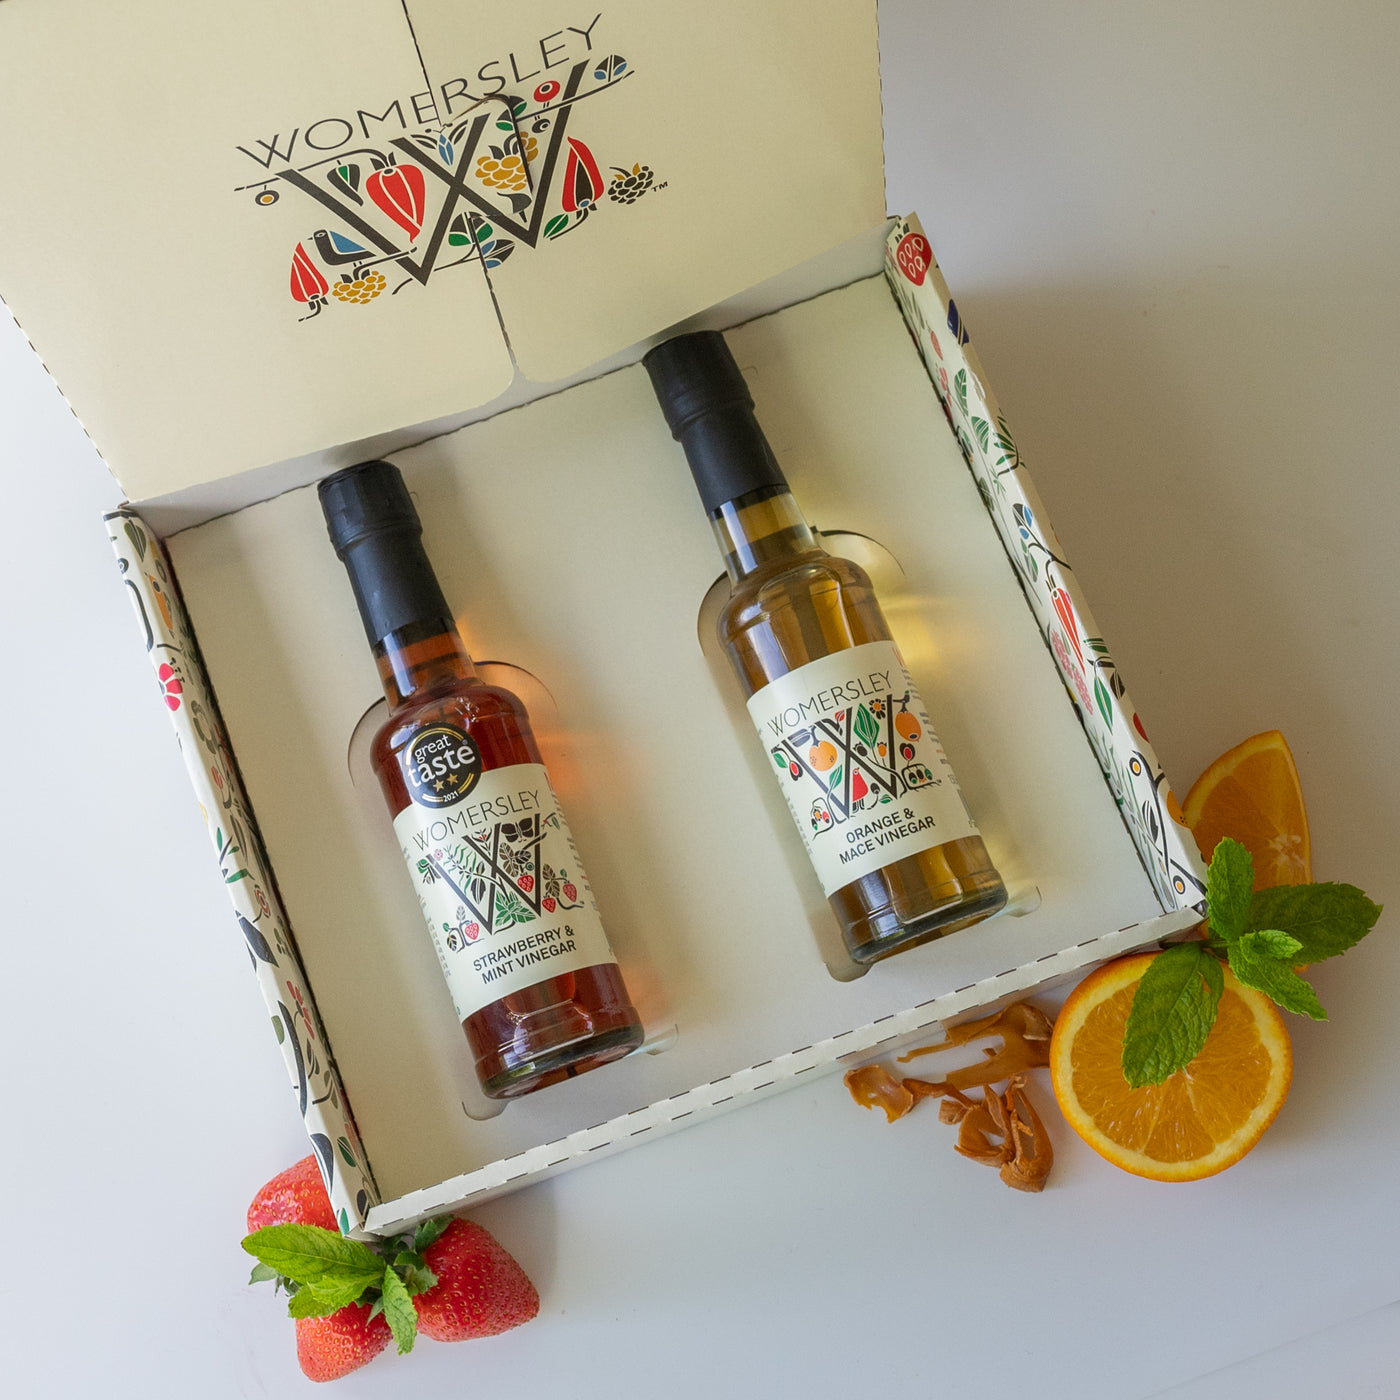 Womersley Foods Fruit & Herb vinegar open Gift Box Great Taste Award Vinegars, with ingredients. Featuring 150ml Strawberry and Mint fruit vinegar and Orange and Mace fruit vinegar lying in the box with image of strawberry, mint leaf, orange and mace on a white background.